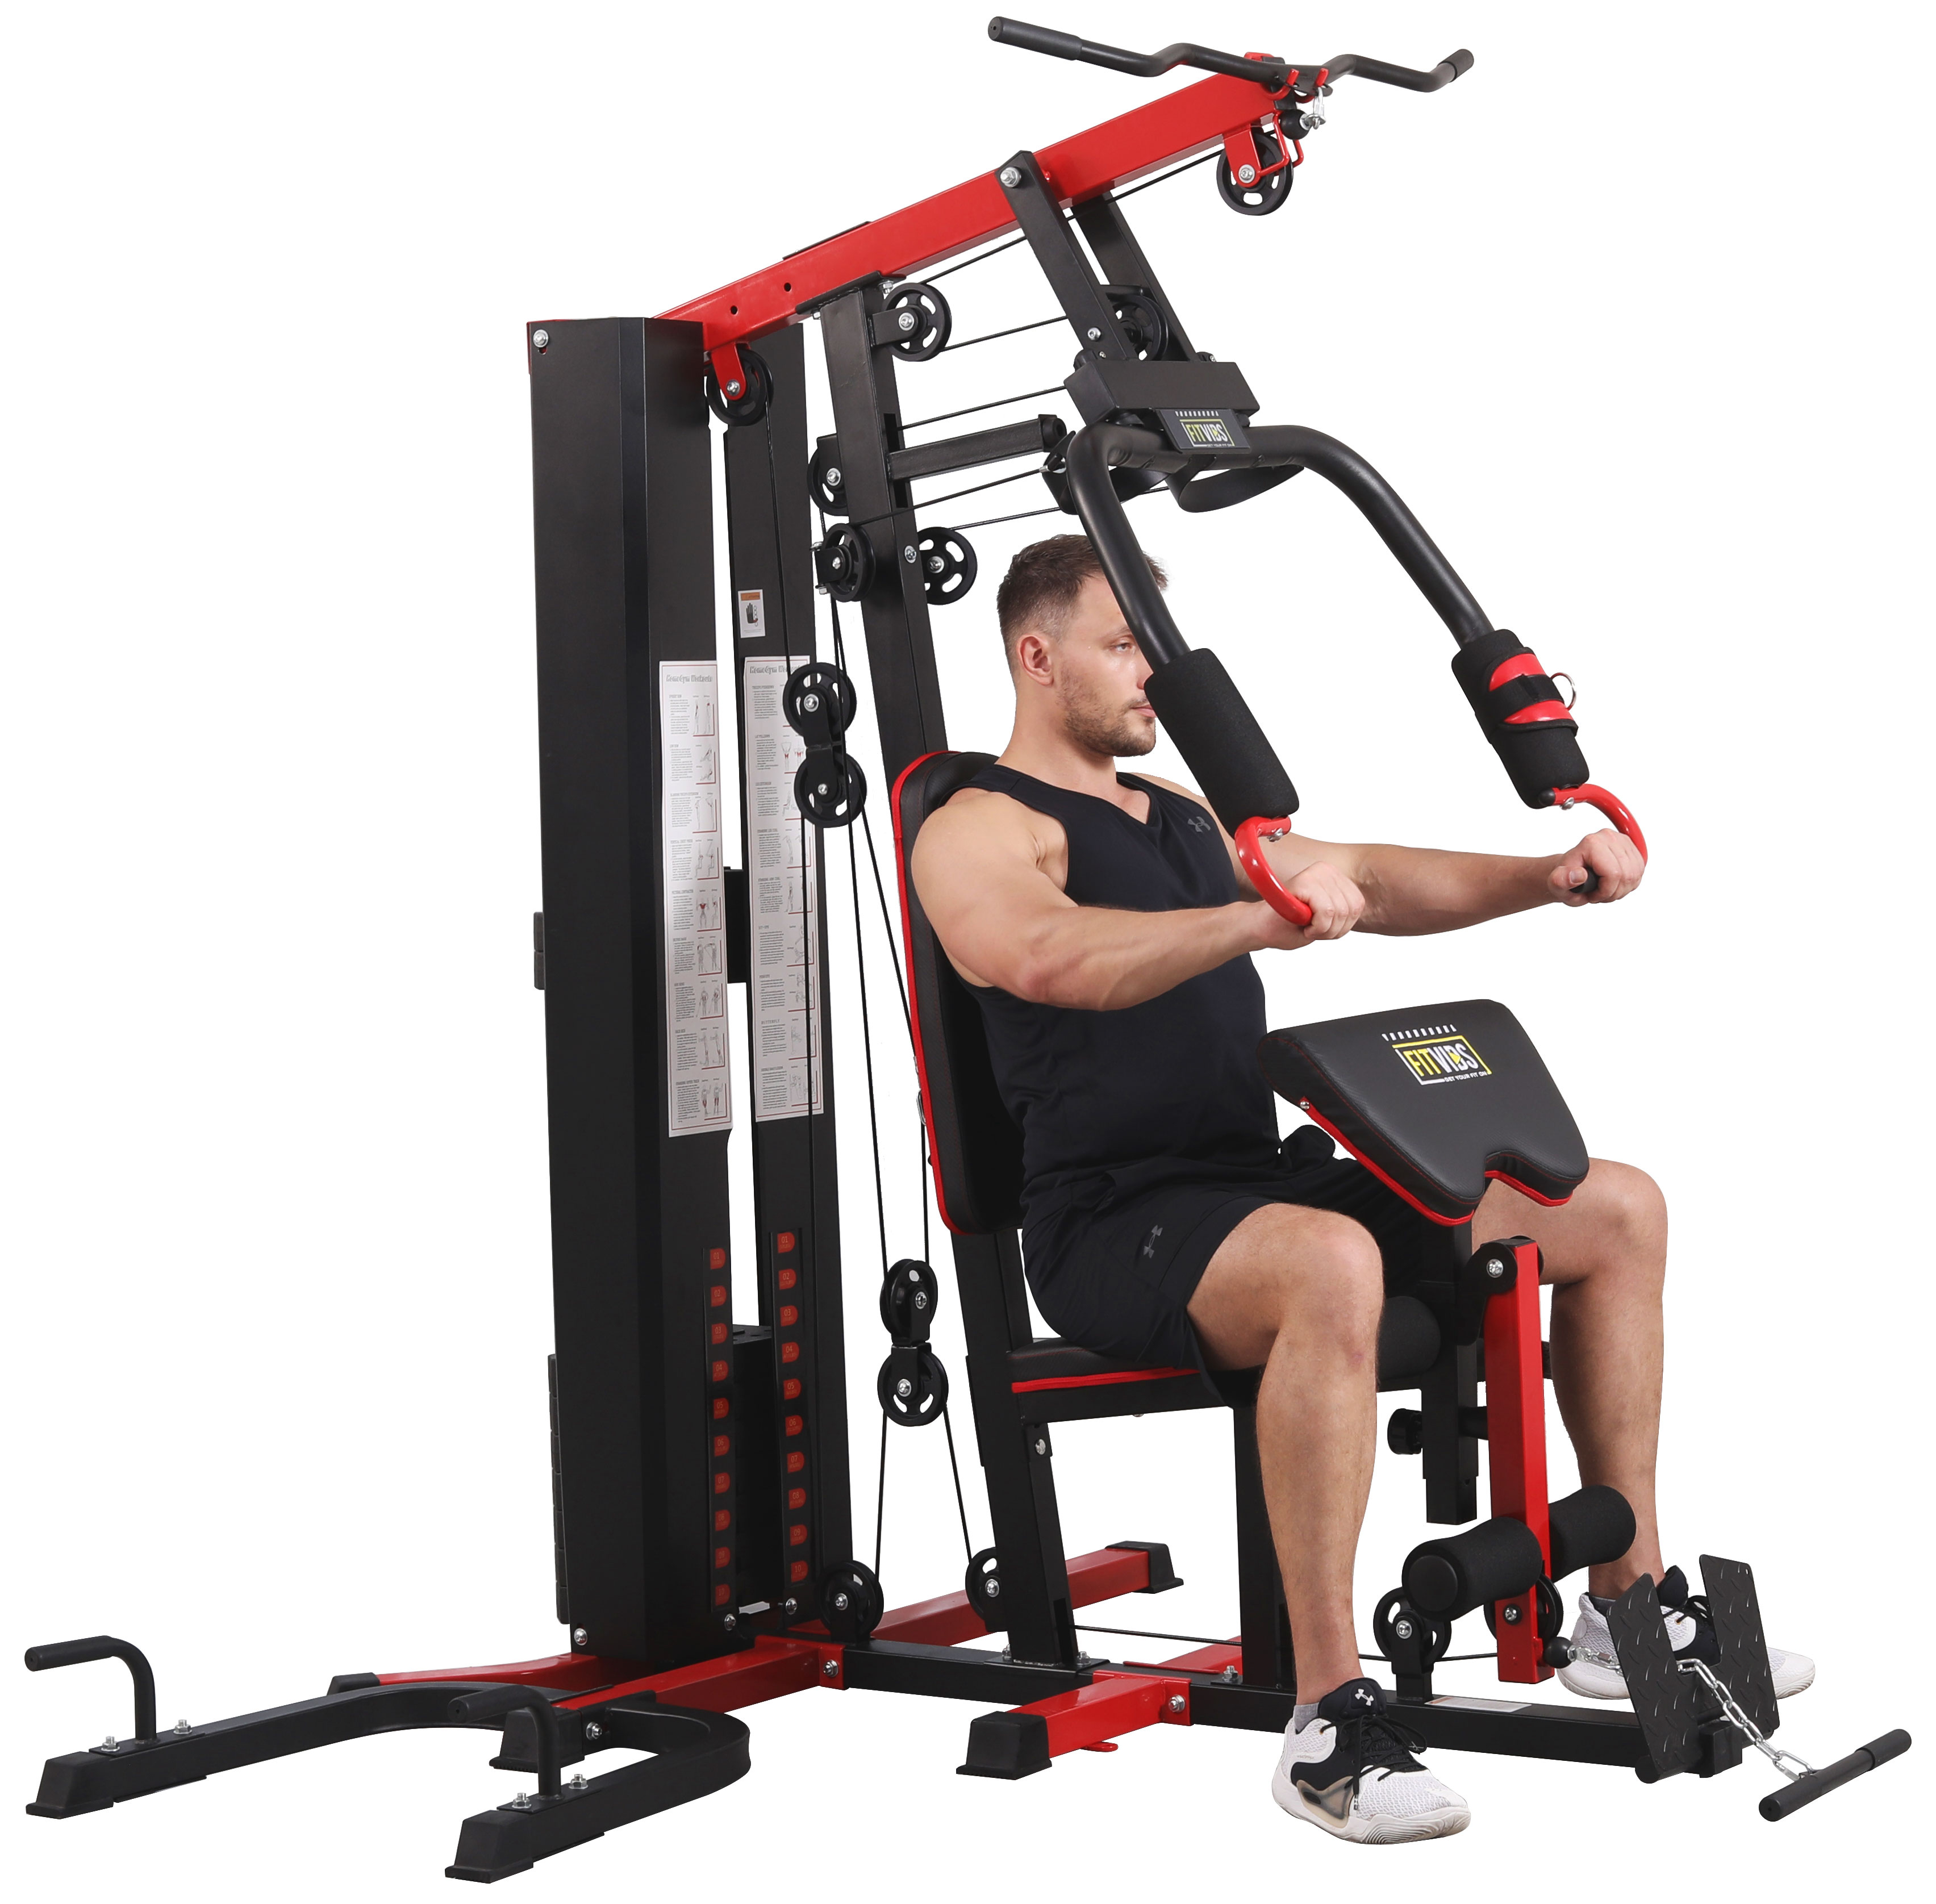 Fitvids LX800 Home Gym System Workout Station with 330 Lbs of Resistance, 122.5 Lbs Weight Stack, Two Station, Comes with Installation Instruction Video, Ships in 6 Boxes - image 1 of 13